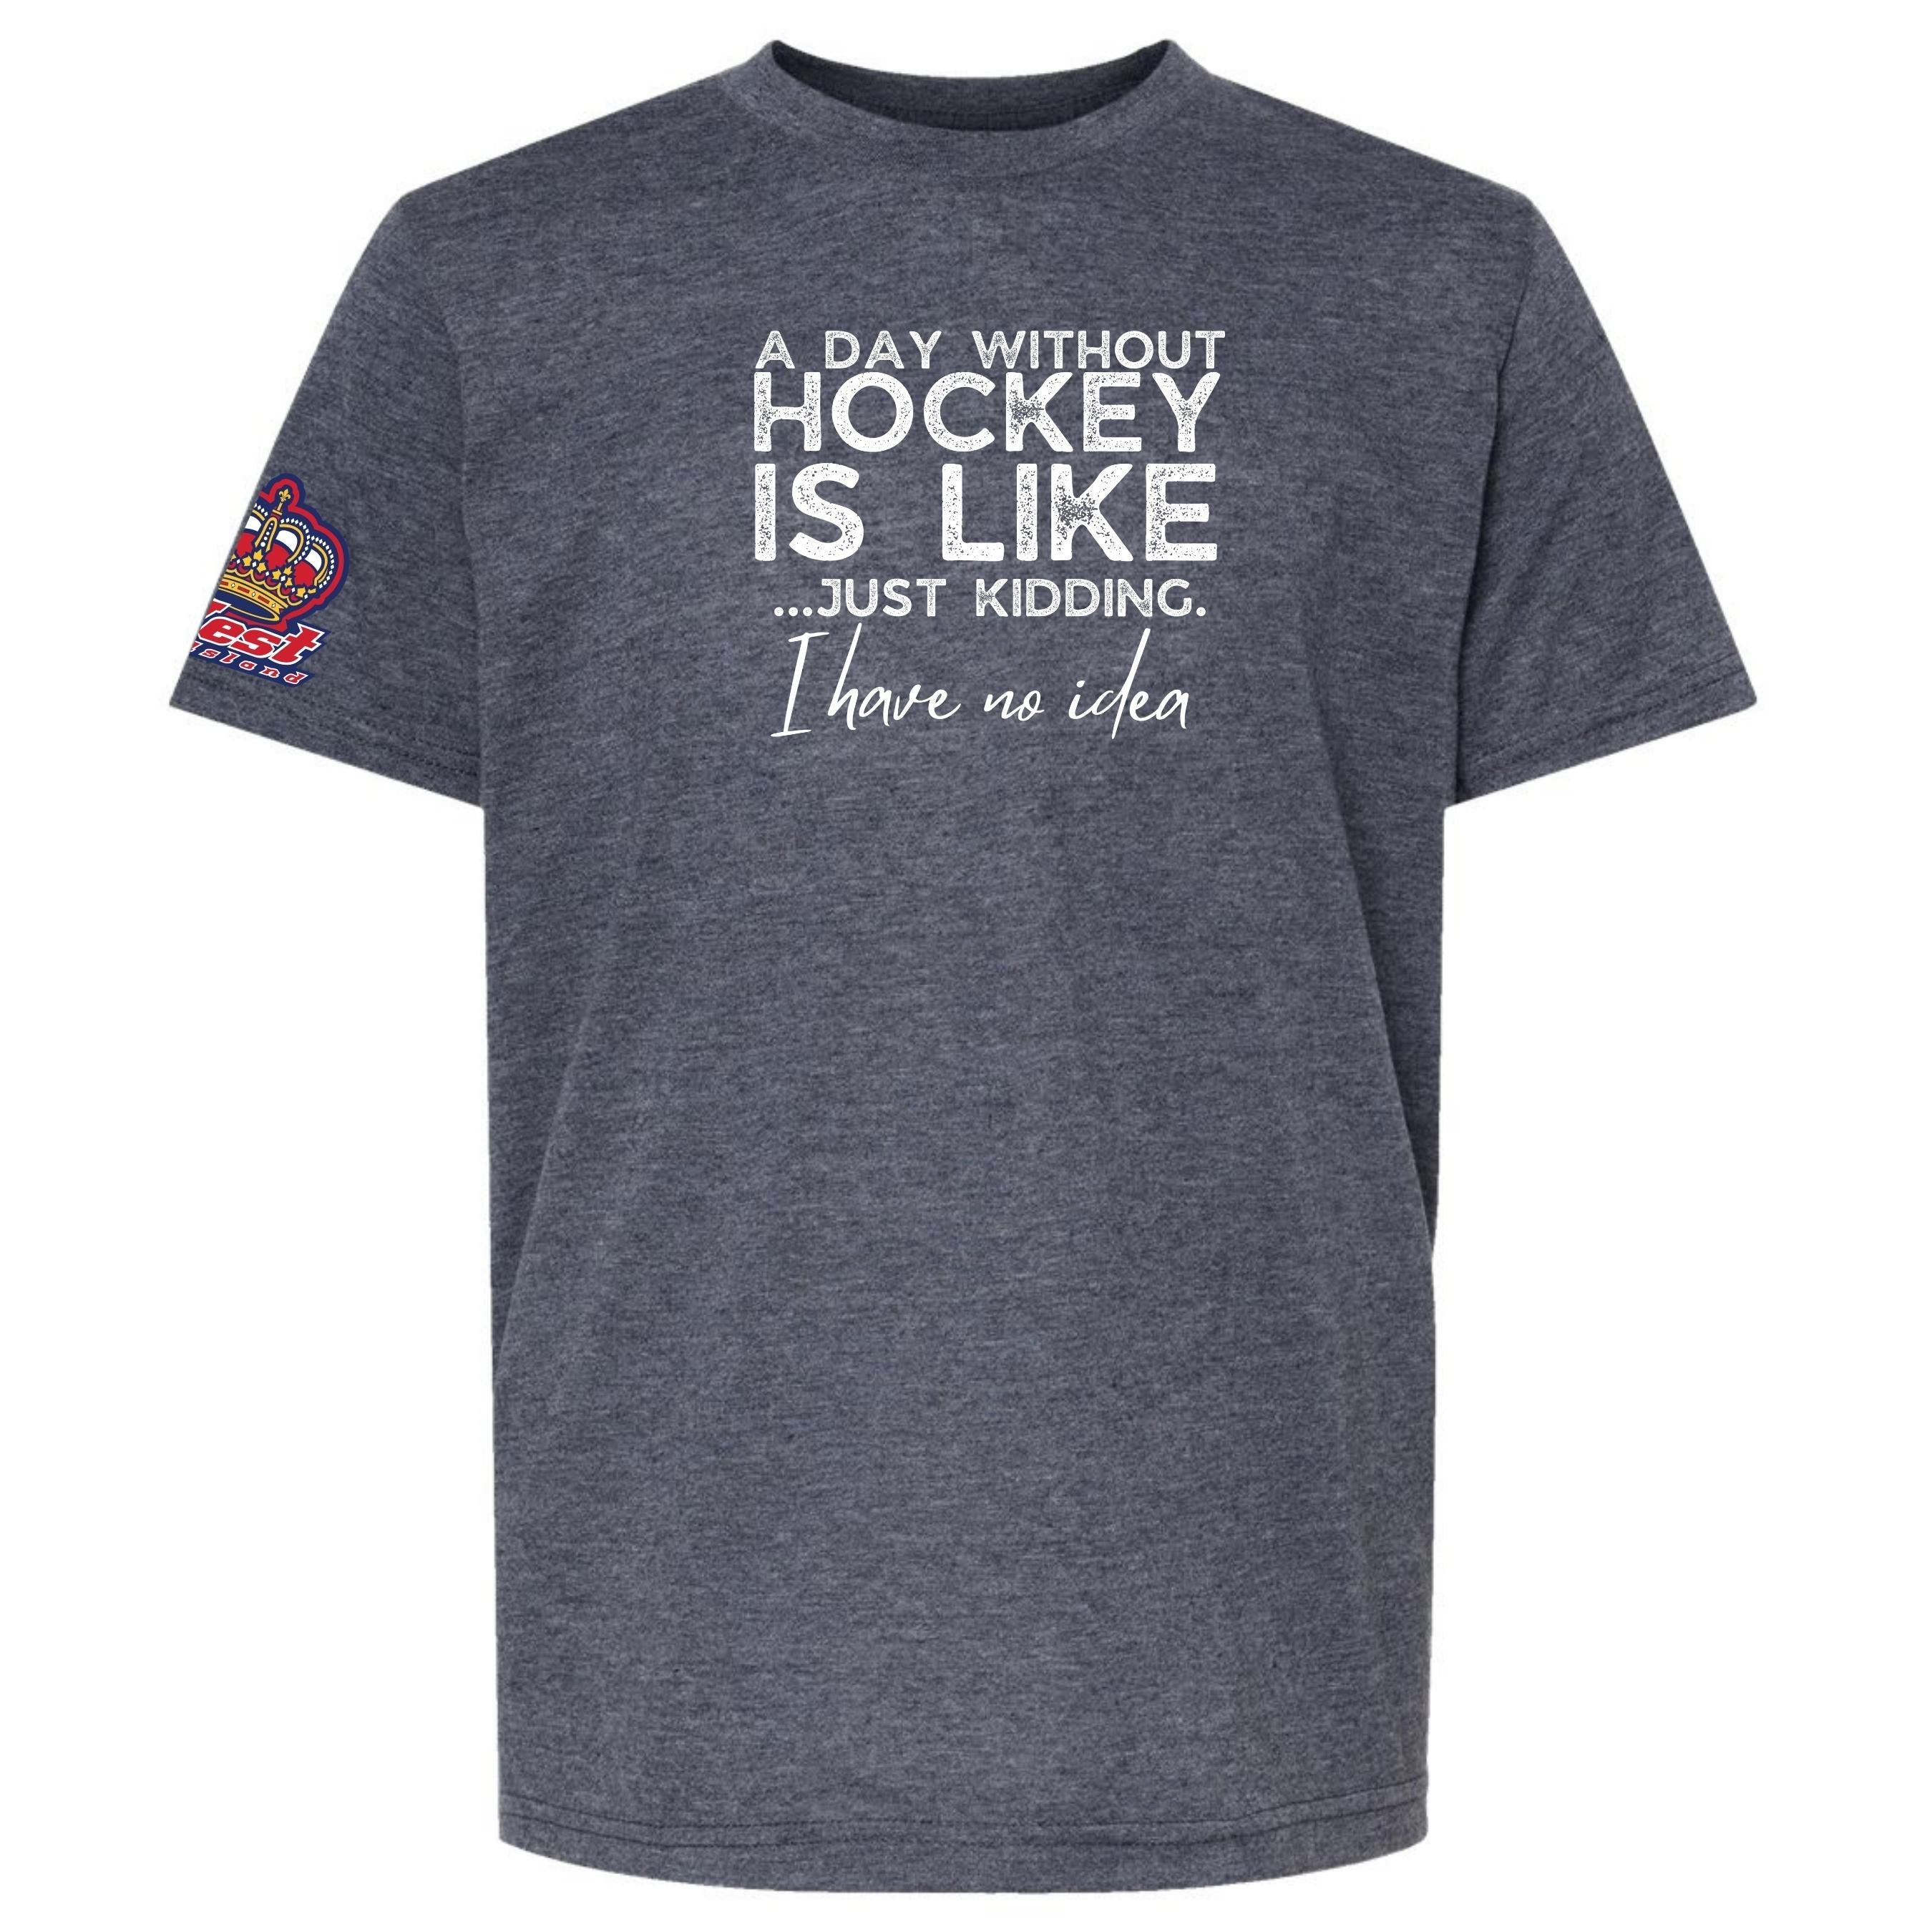 HWI Adult 'A Day Without Hockey' T-shirt